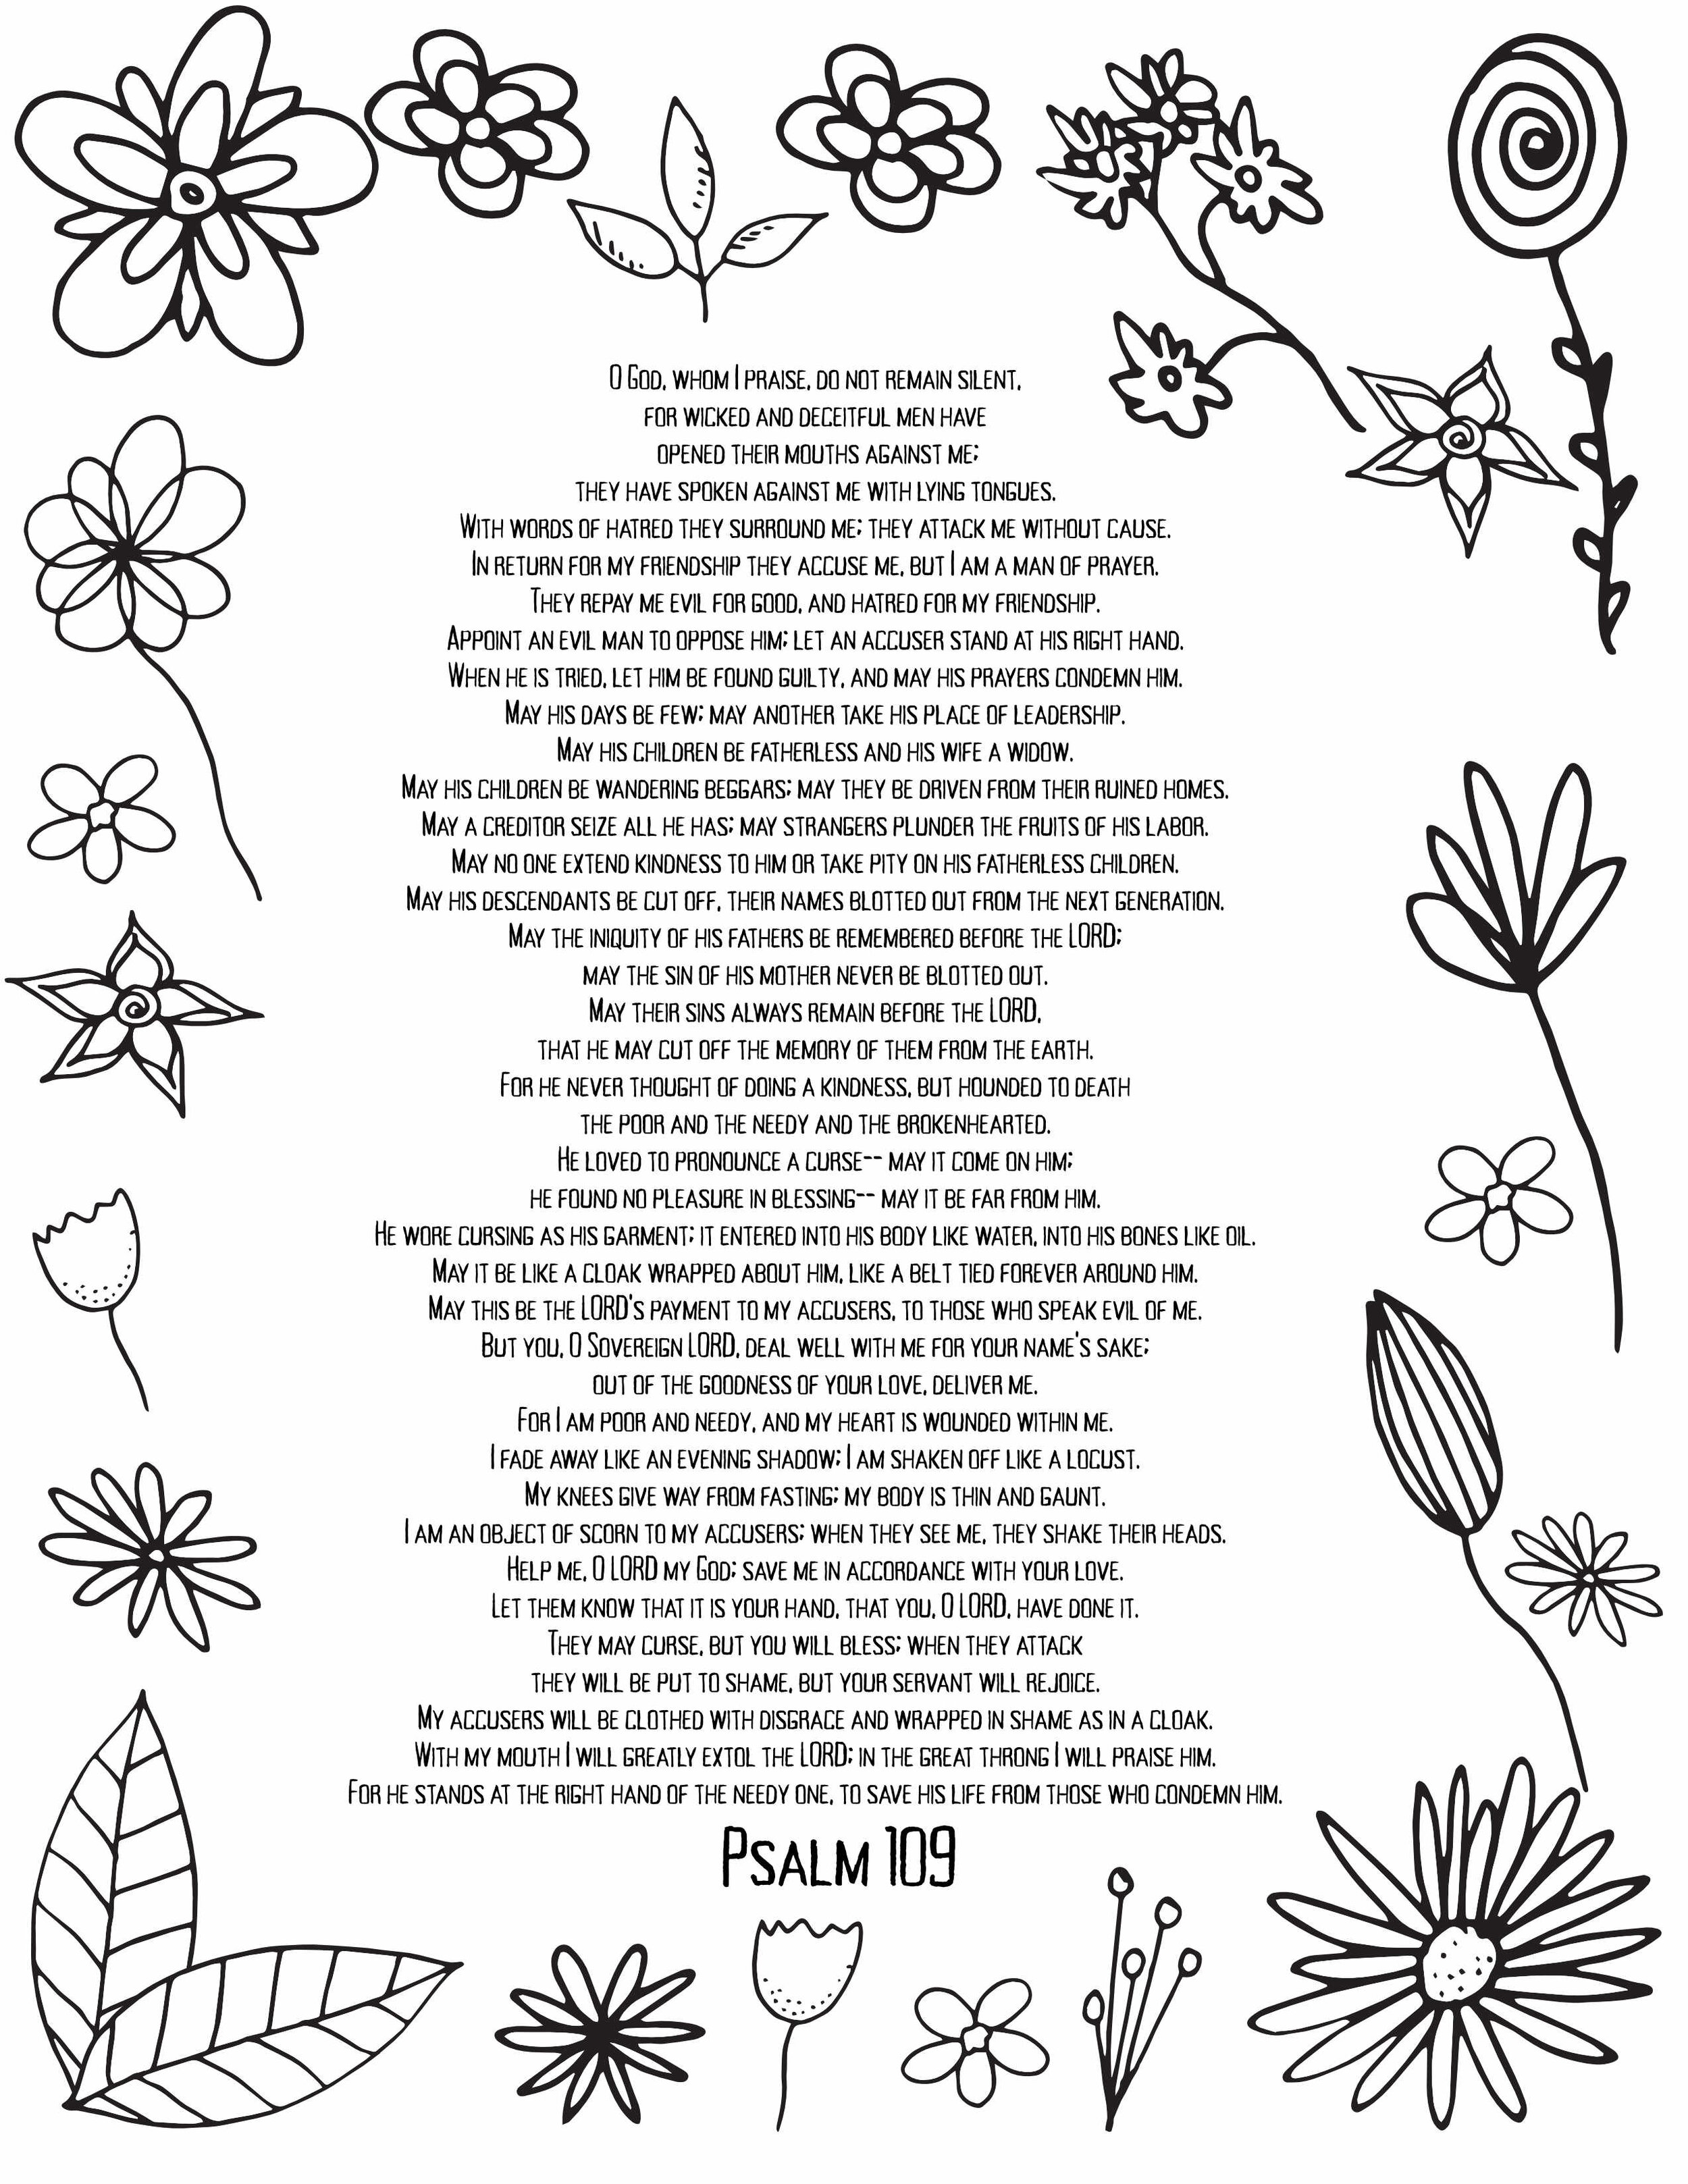 10 Free Printable Psalm Coloring Pages - Download and Color Adult Scripture - Psalm 109CLICK HERE TO DOWNLOAD THIS PAGE FREE